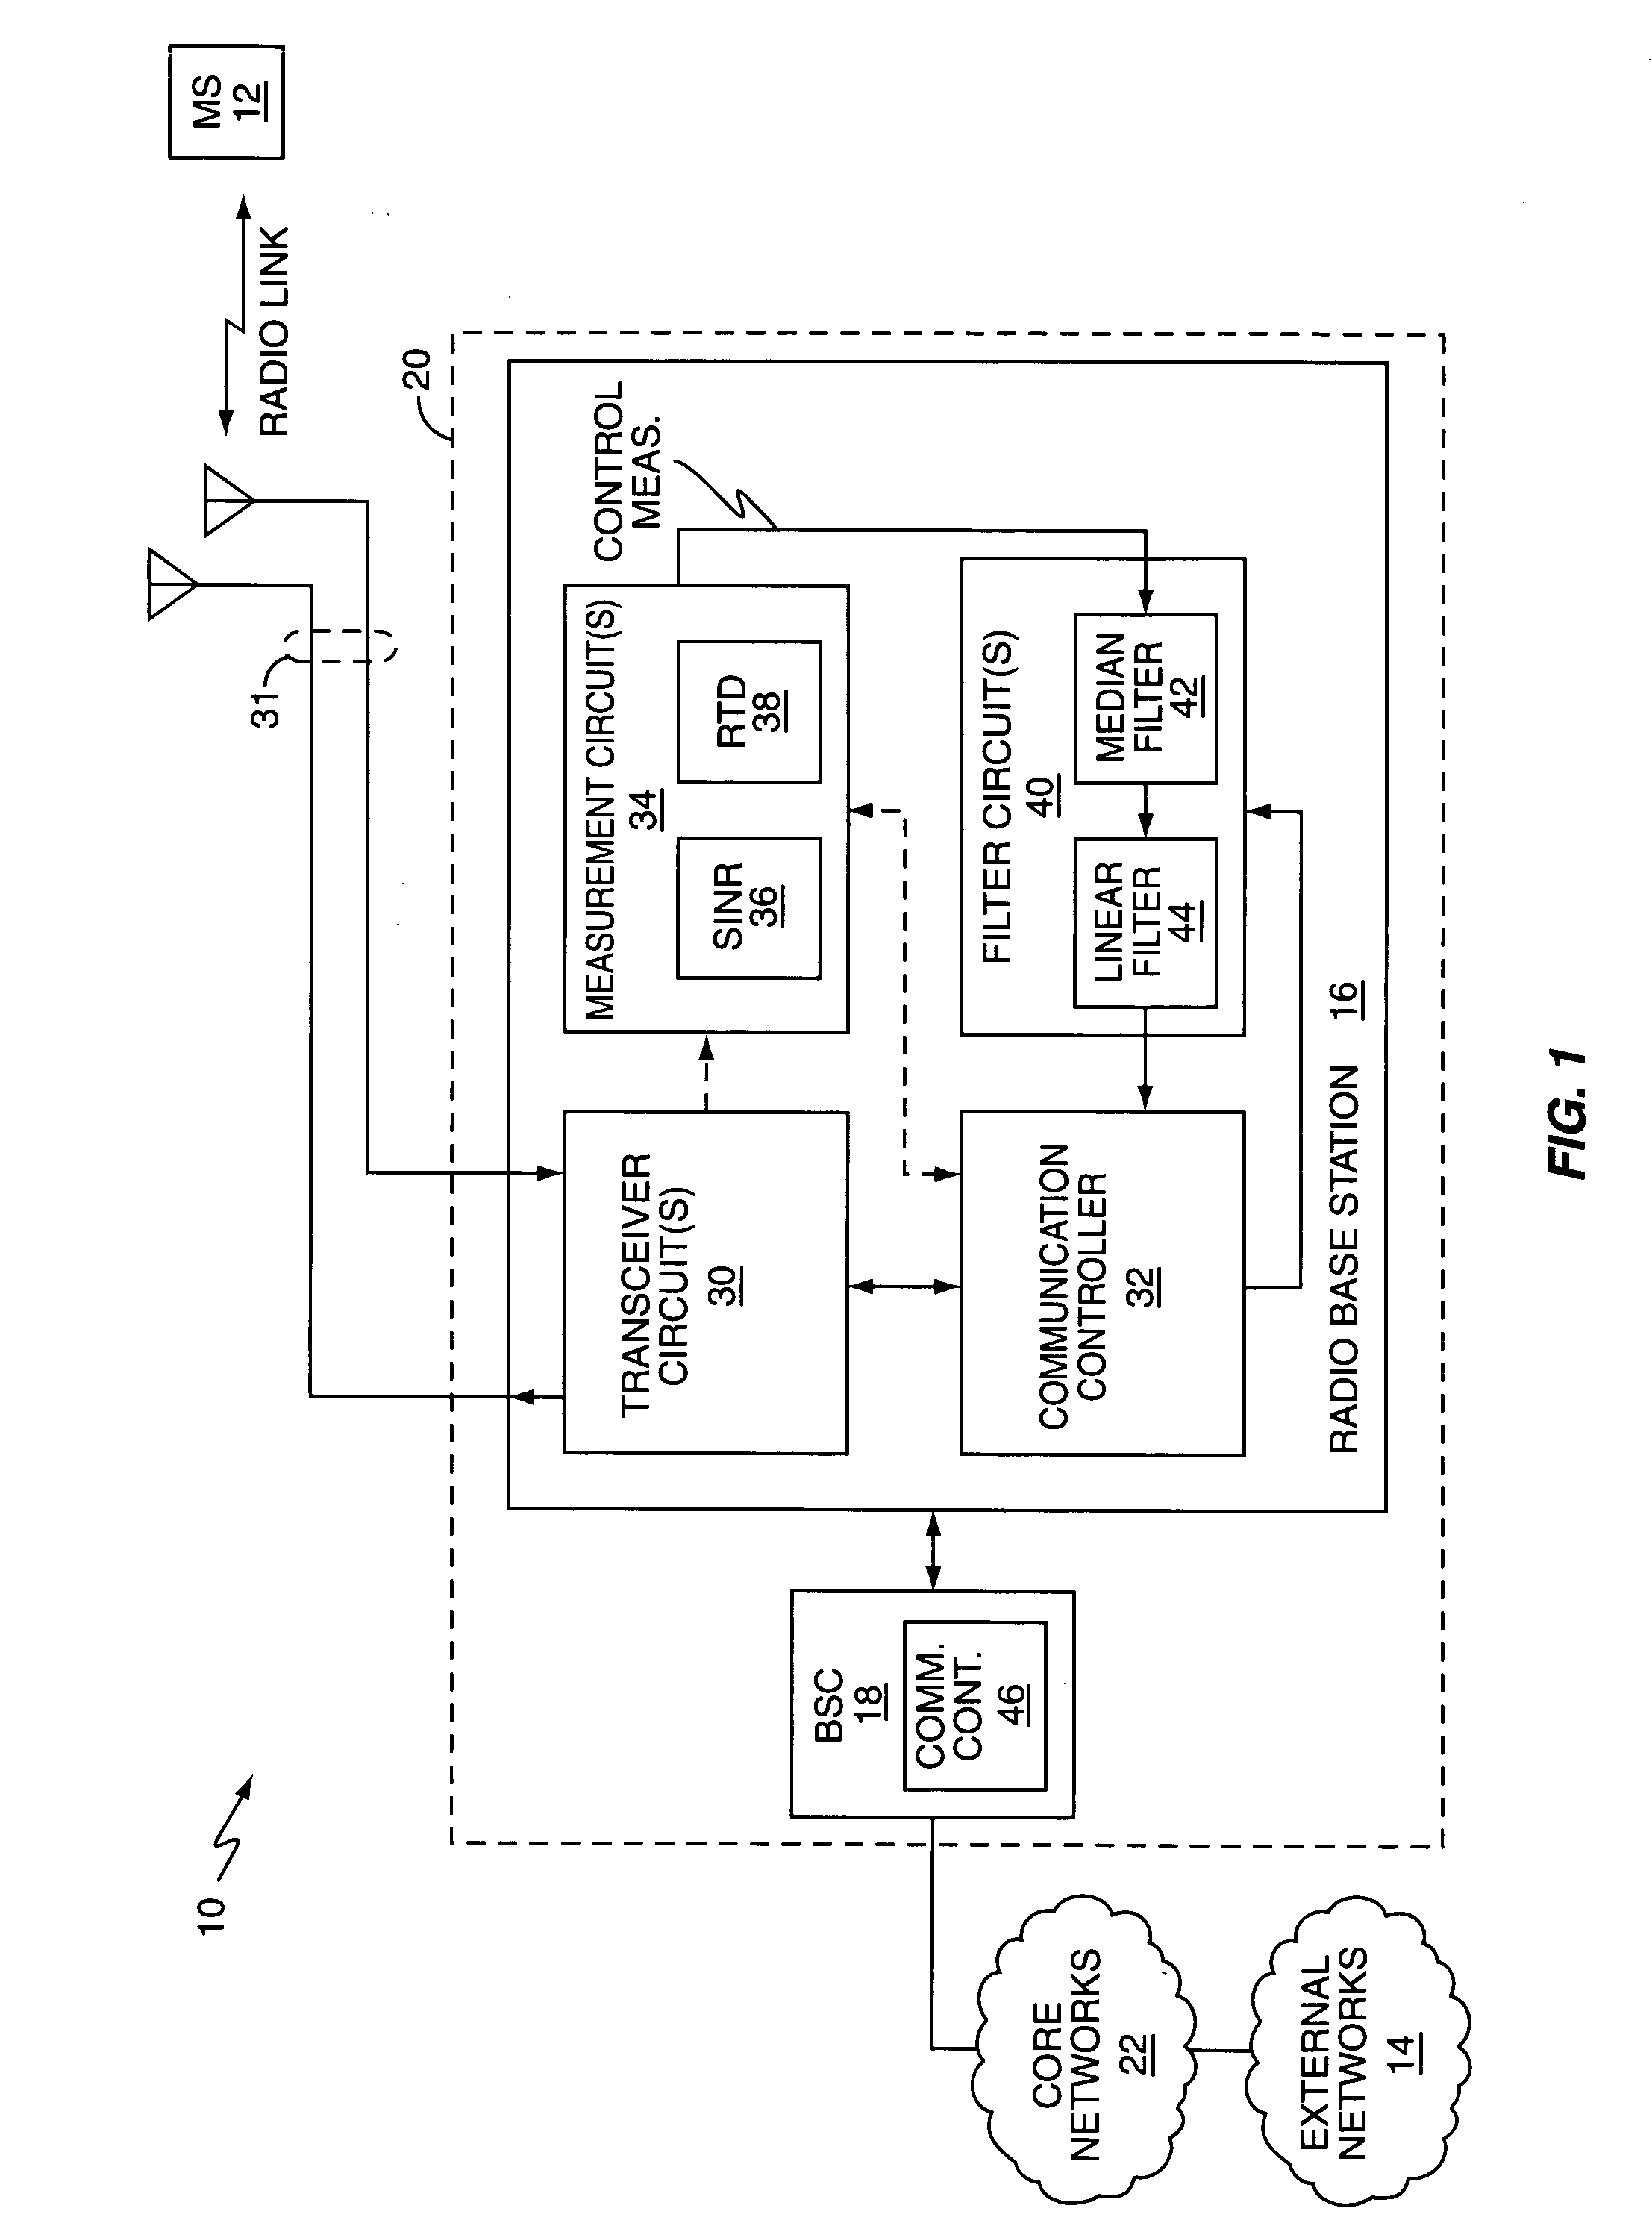 Method and apparatus to reduce multipath effects on radio link control measurements